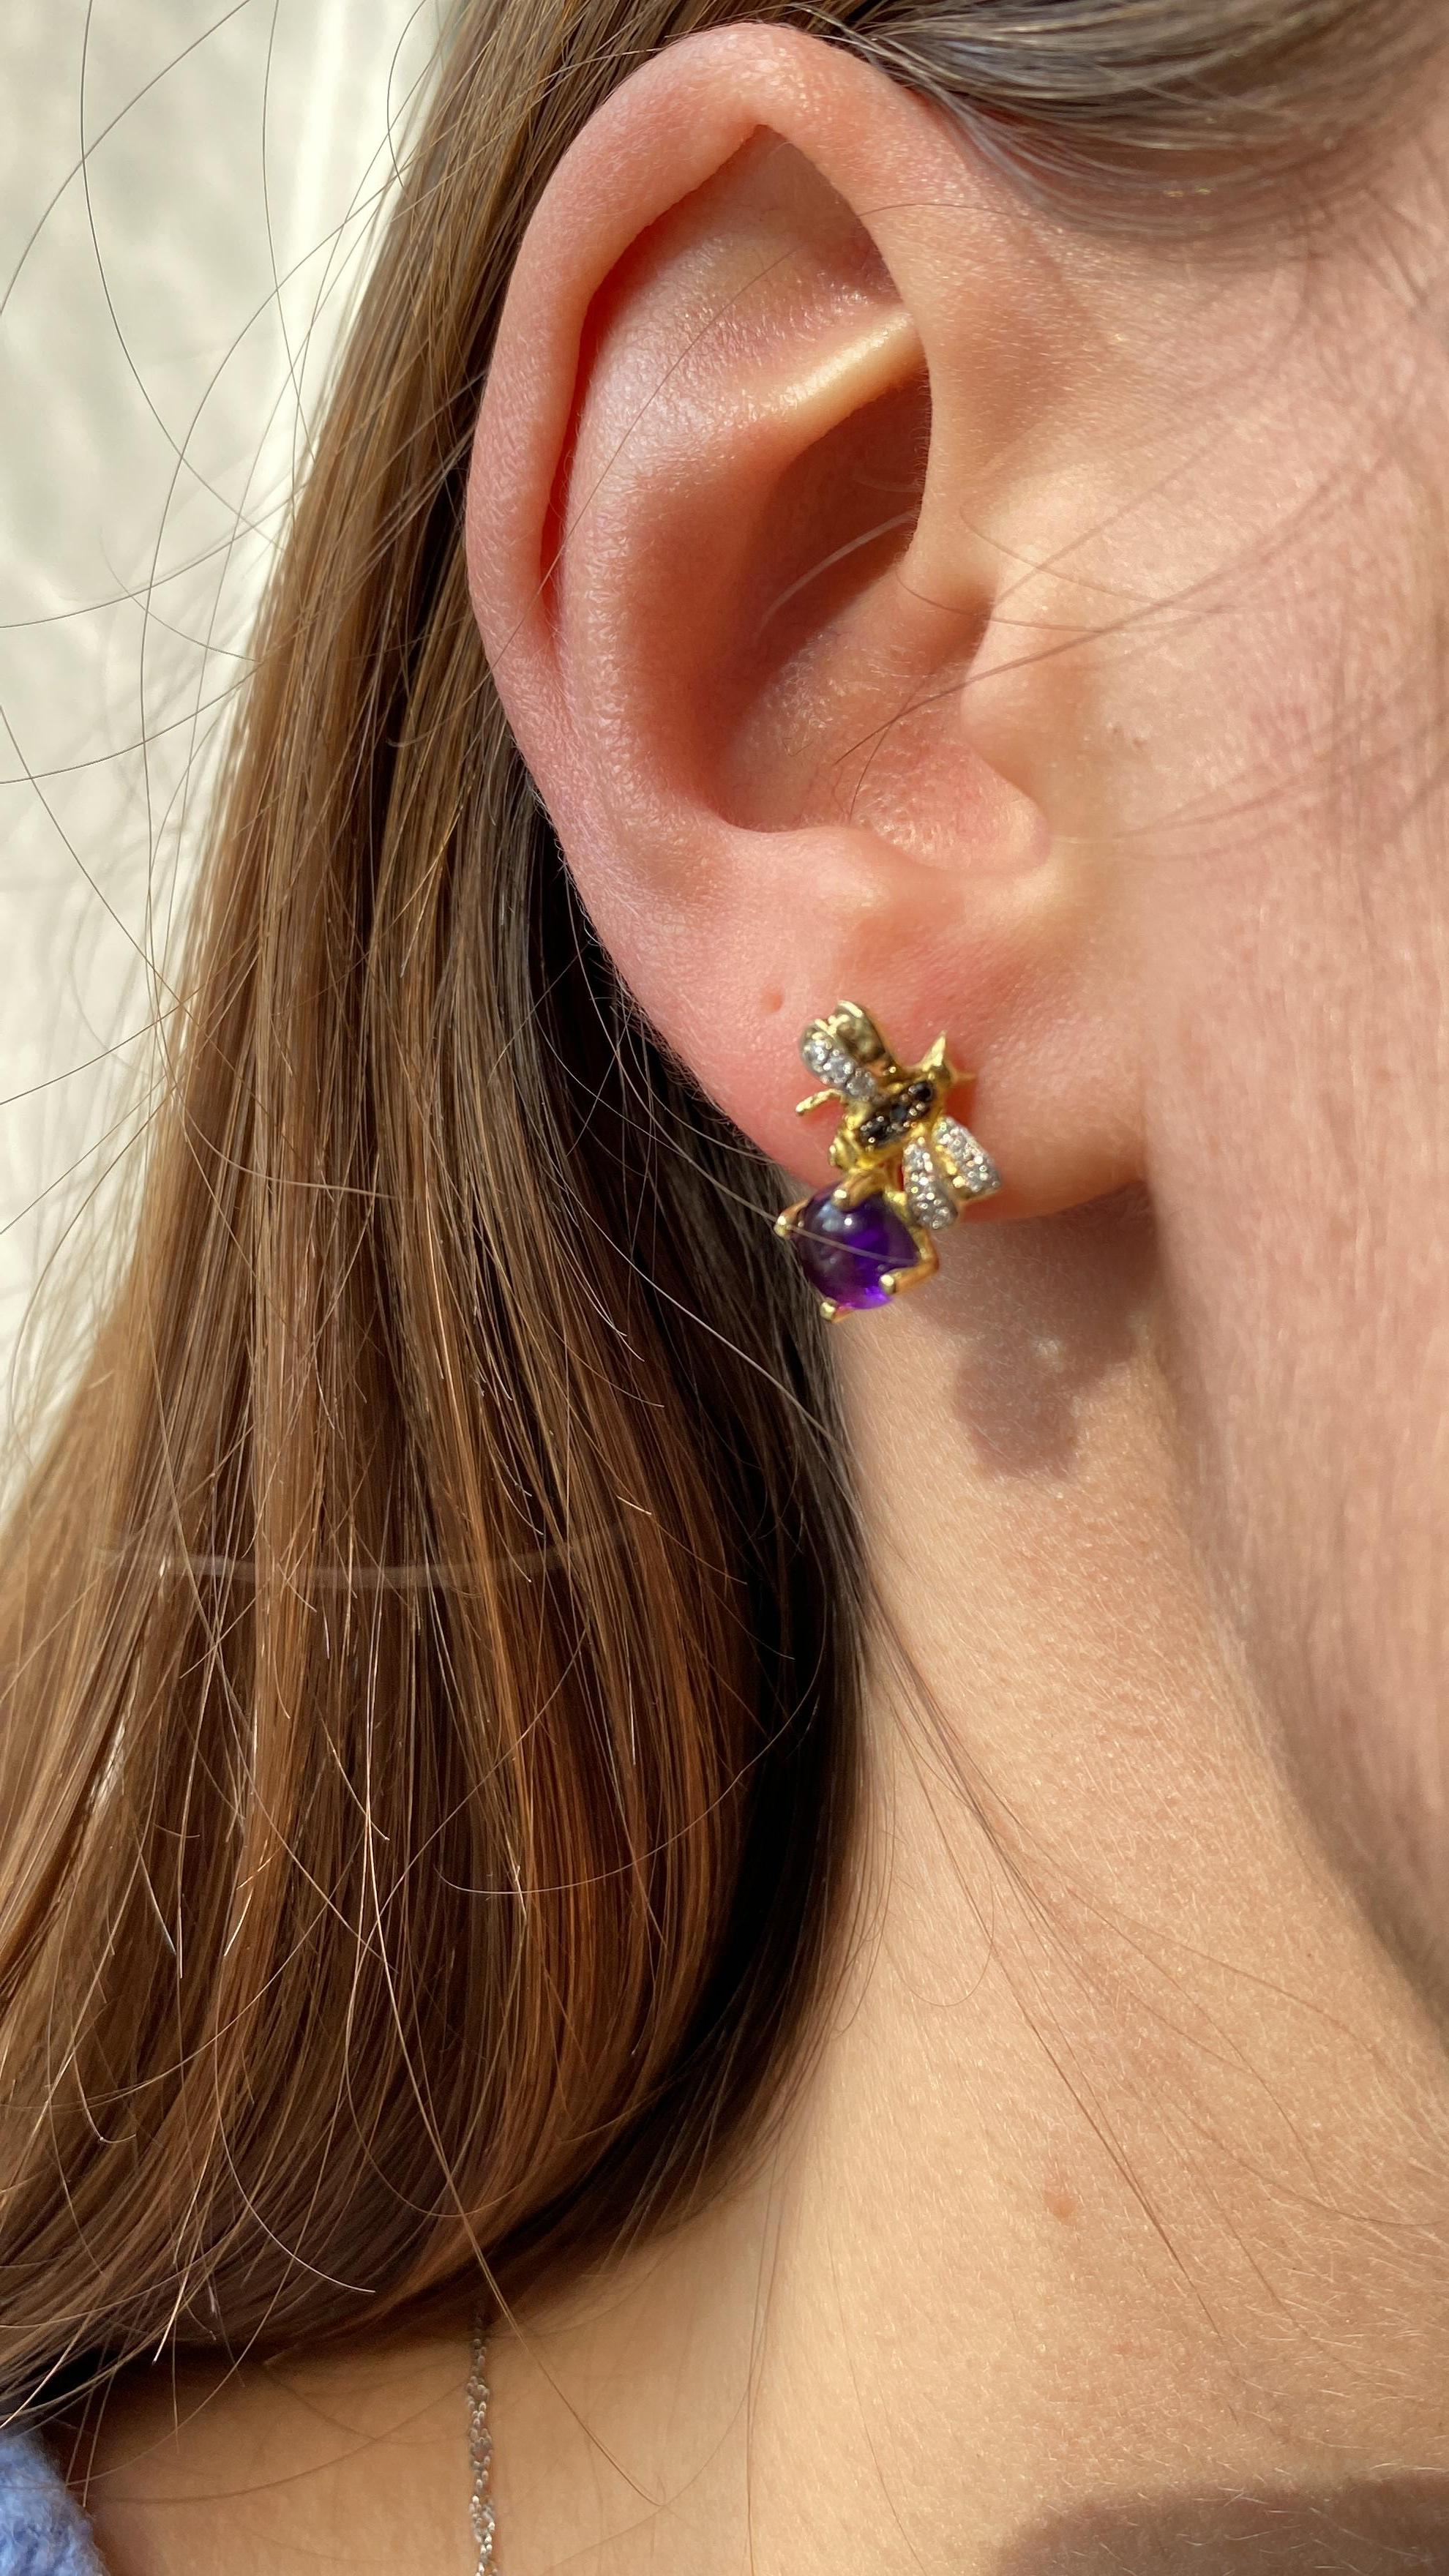 Rossella Ugolini Bee Collection Stud Earrings Handcrafted in Italy in 18k Yellow Gold, with 0.16 White and Black Diamonds and 2.20 carats Amethyst.  Ready to ship.
Worn on the lobe, the little bee earrings can be positioned with the Amethyst up or